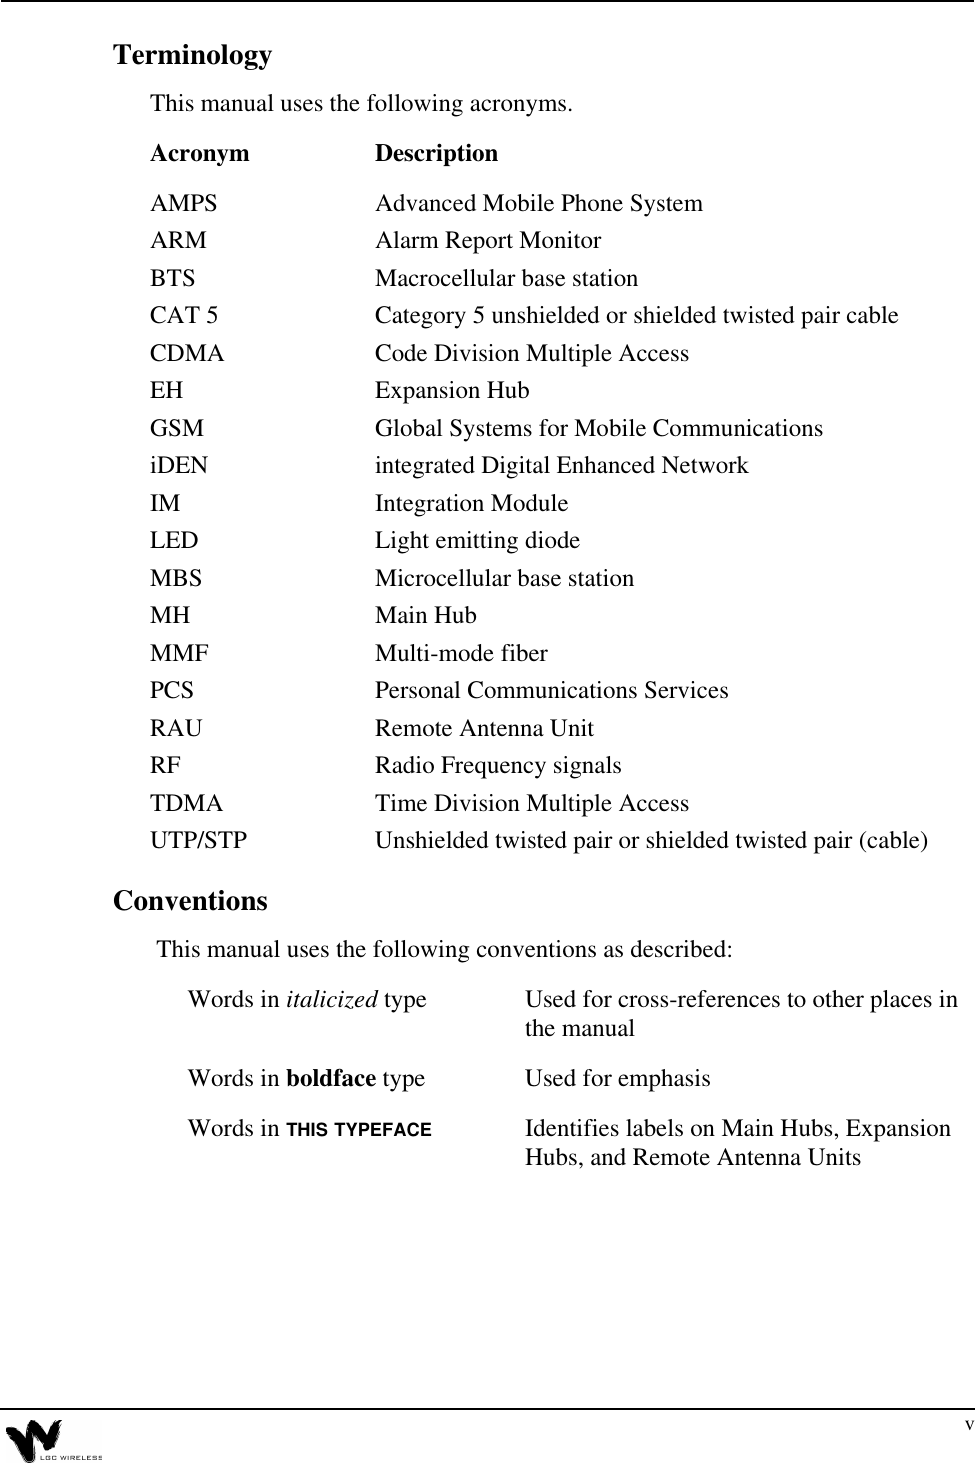 vTerminologyThis manual uses the following acronyms.Acronym DescriptionAMPS Advanced Mobile Phone SystemARM Alarm Report MonitorBTS Macrocellular base stationCAT 5 Category 5 unshielded or shielded twisted pair cableCDMA Code Division Multiple AccessEH Expansion HubGSM Global Systems for Mobile CommunicationsiDEN integrated Digital Enhanced NetworkIM Integration ModuleLED Light emitting diodeMBS Microcellular base stationMH Main HubMMF Multi-mode fiberPCS Personal Communications ServicesRAU Remote Antenna UnitRF Radio Frequency signalsTDMA Time Division Multiple AccessUTP/STP Unshielded twisted pair or shielded twisted pair (cable)Conventions This manual uses the following conventions as described:Words in italicized type Used for cross-references to other places in the manualWords in boldface type Used for emphasisWords in THIS TYPEFACE Identifies labels on Main Hubs, Expansion Hubs, and Remote Antenna Units